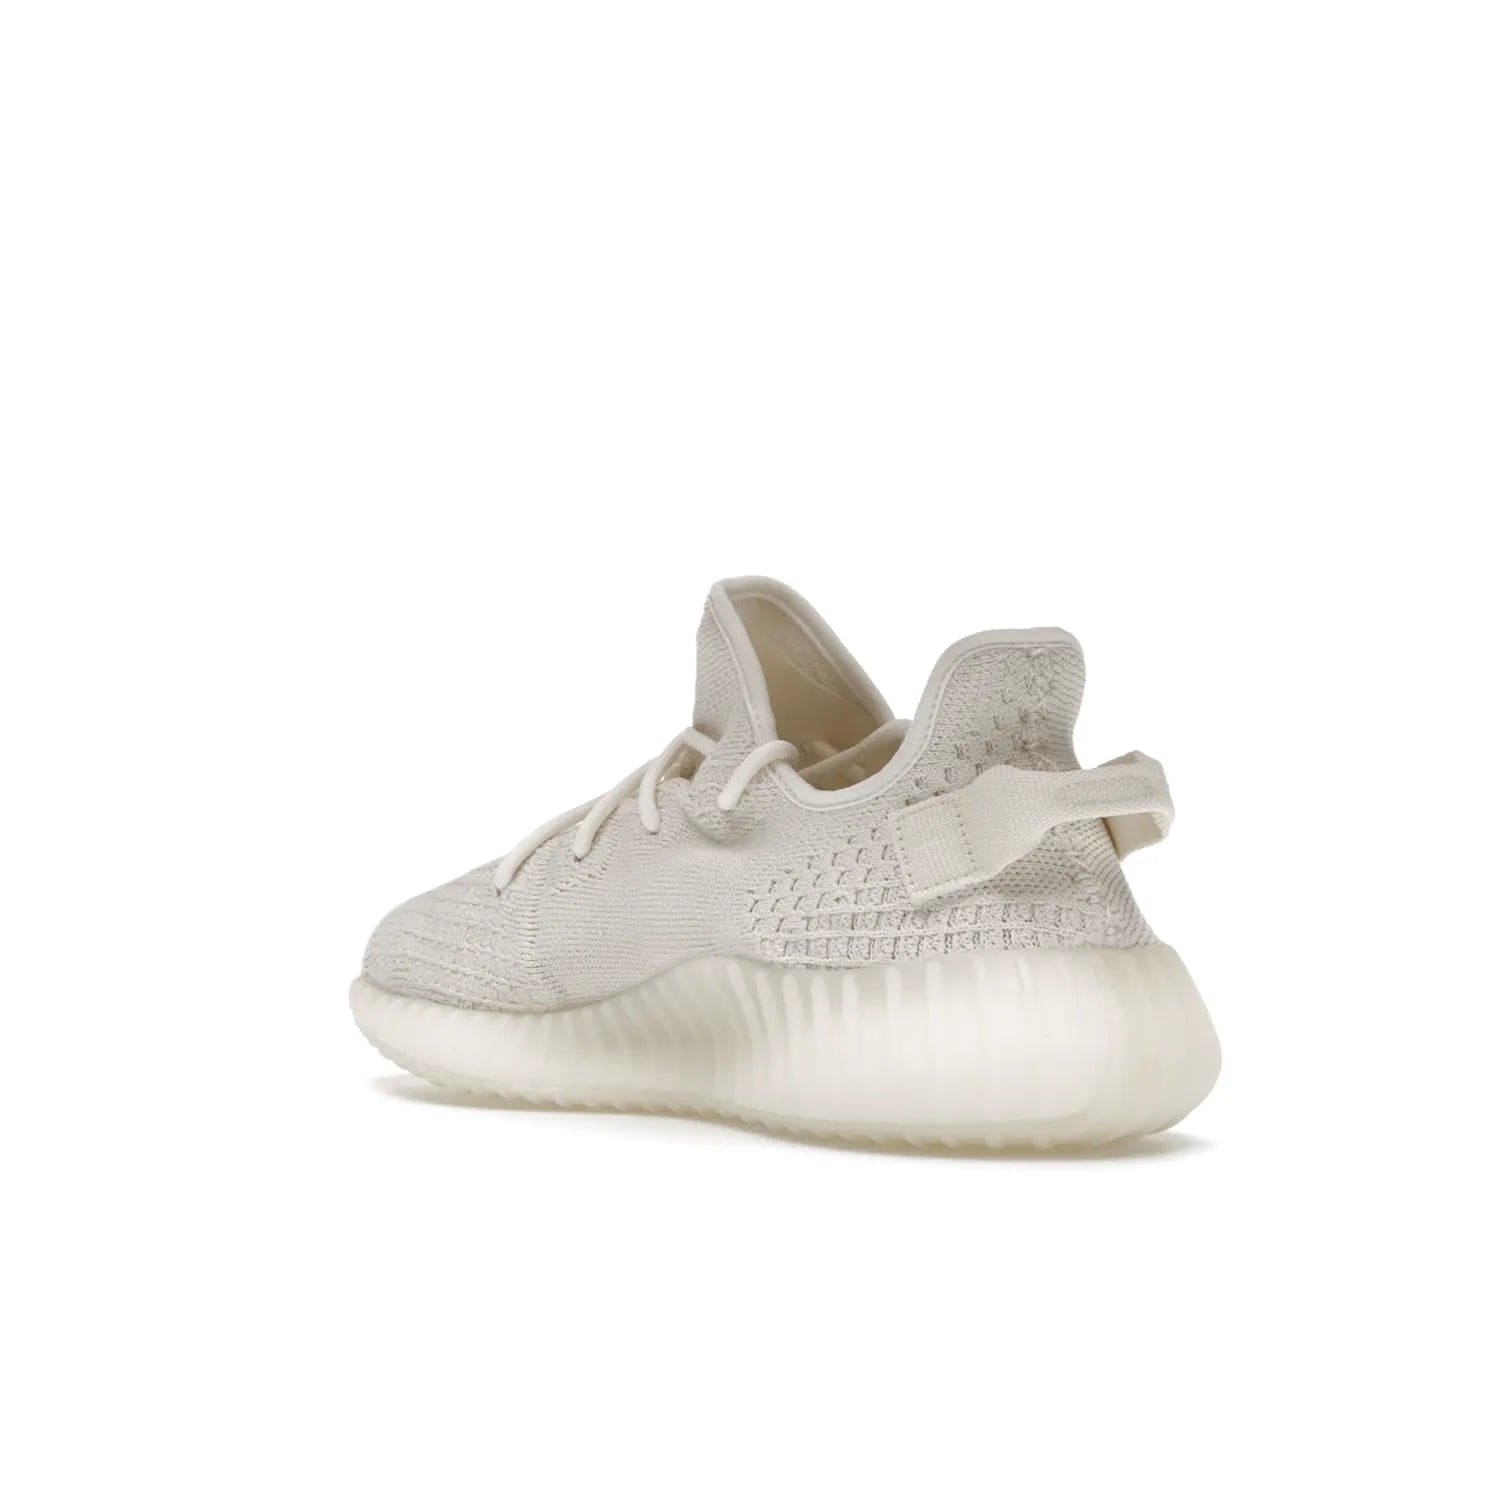 adidas Yeezy Boost 350 V2 Bone - Image 24 - Only at www.BallersClubKickz.com - Grab the stylish and comfortable adidas Yeezy Boost 350 V2 Bone in March 2022. This sneaker features a triple white Primeknit upper, mesh side stripes and canvas heel tabs, sitting atop a semi-translucent sole with Boost technology. Sure to keep your feet comfortable and stylish!